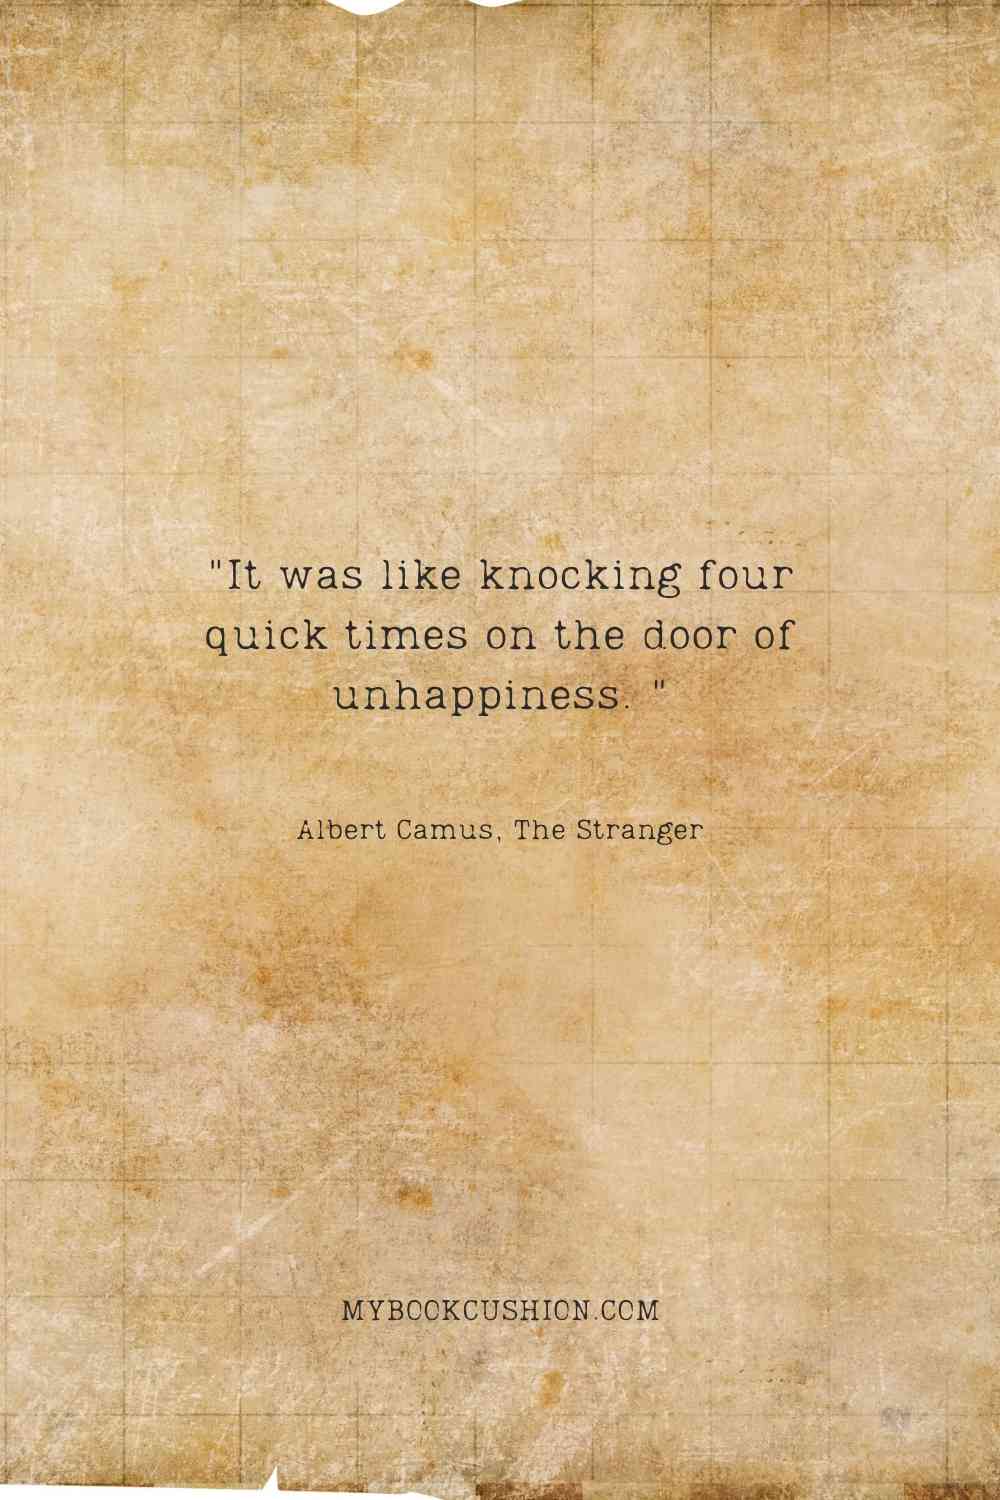 "It was like knocking four quick times on the door of unhappiness." Albert Camus, The Stranger